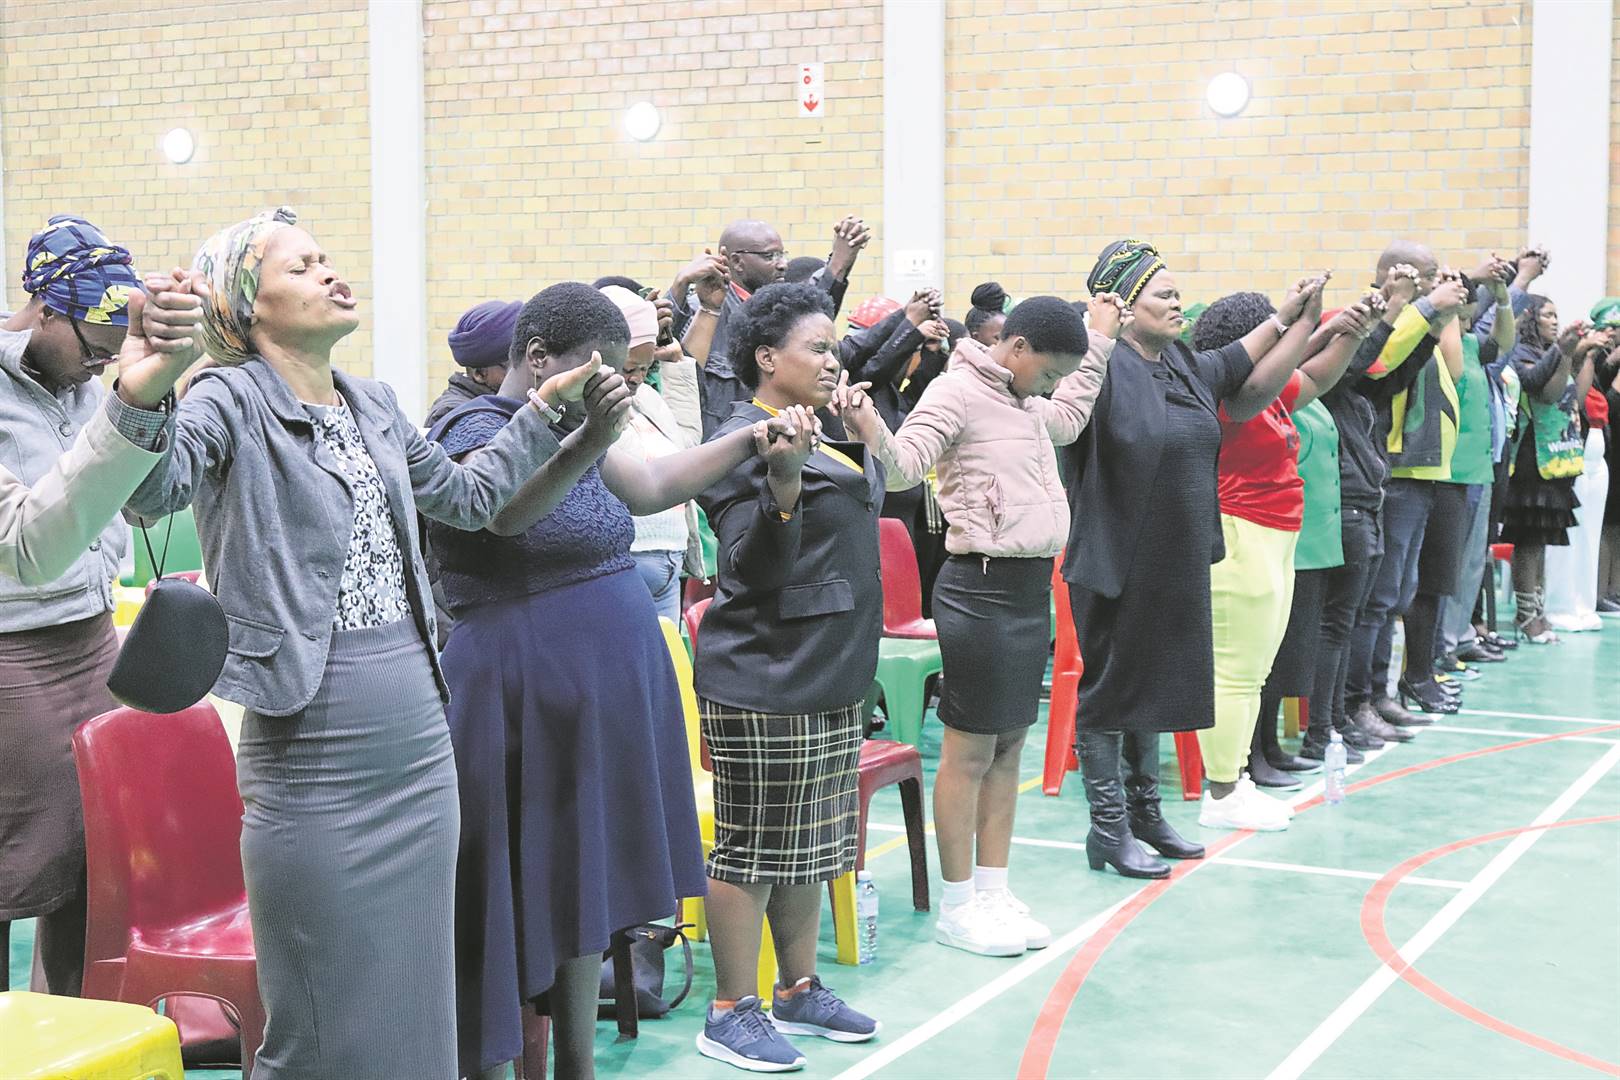 Congregants from various churches and political organisations united in prayer on Saturday 27 April to ask for peaceful elections amid mounting fears in society. Read more on page 5. PHOTO: UNATHI OBOSE